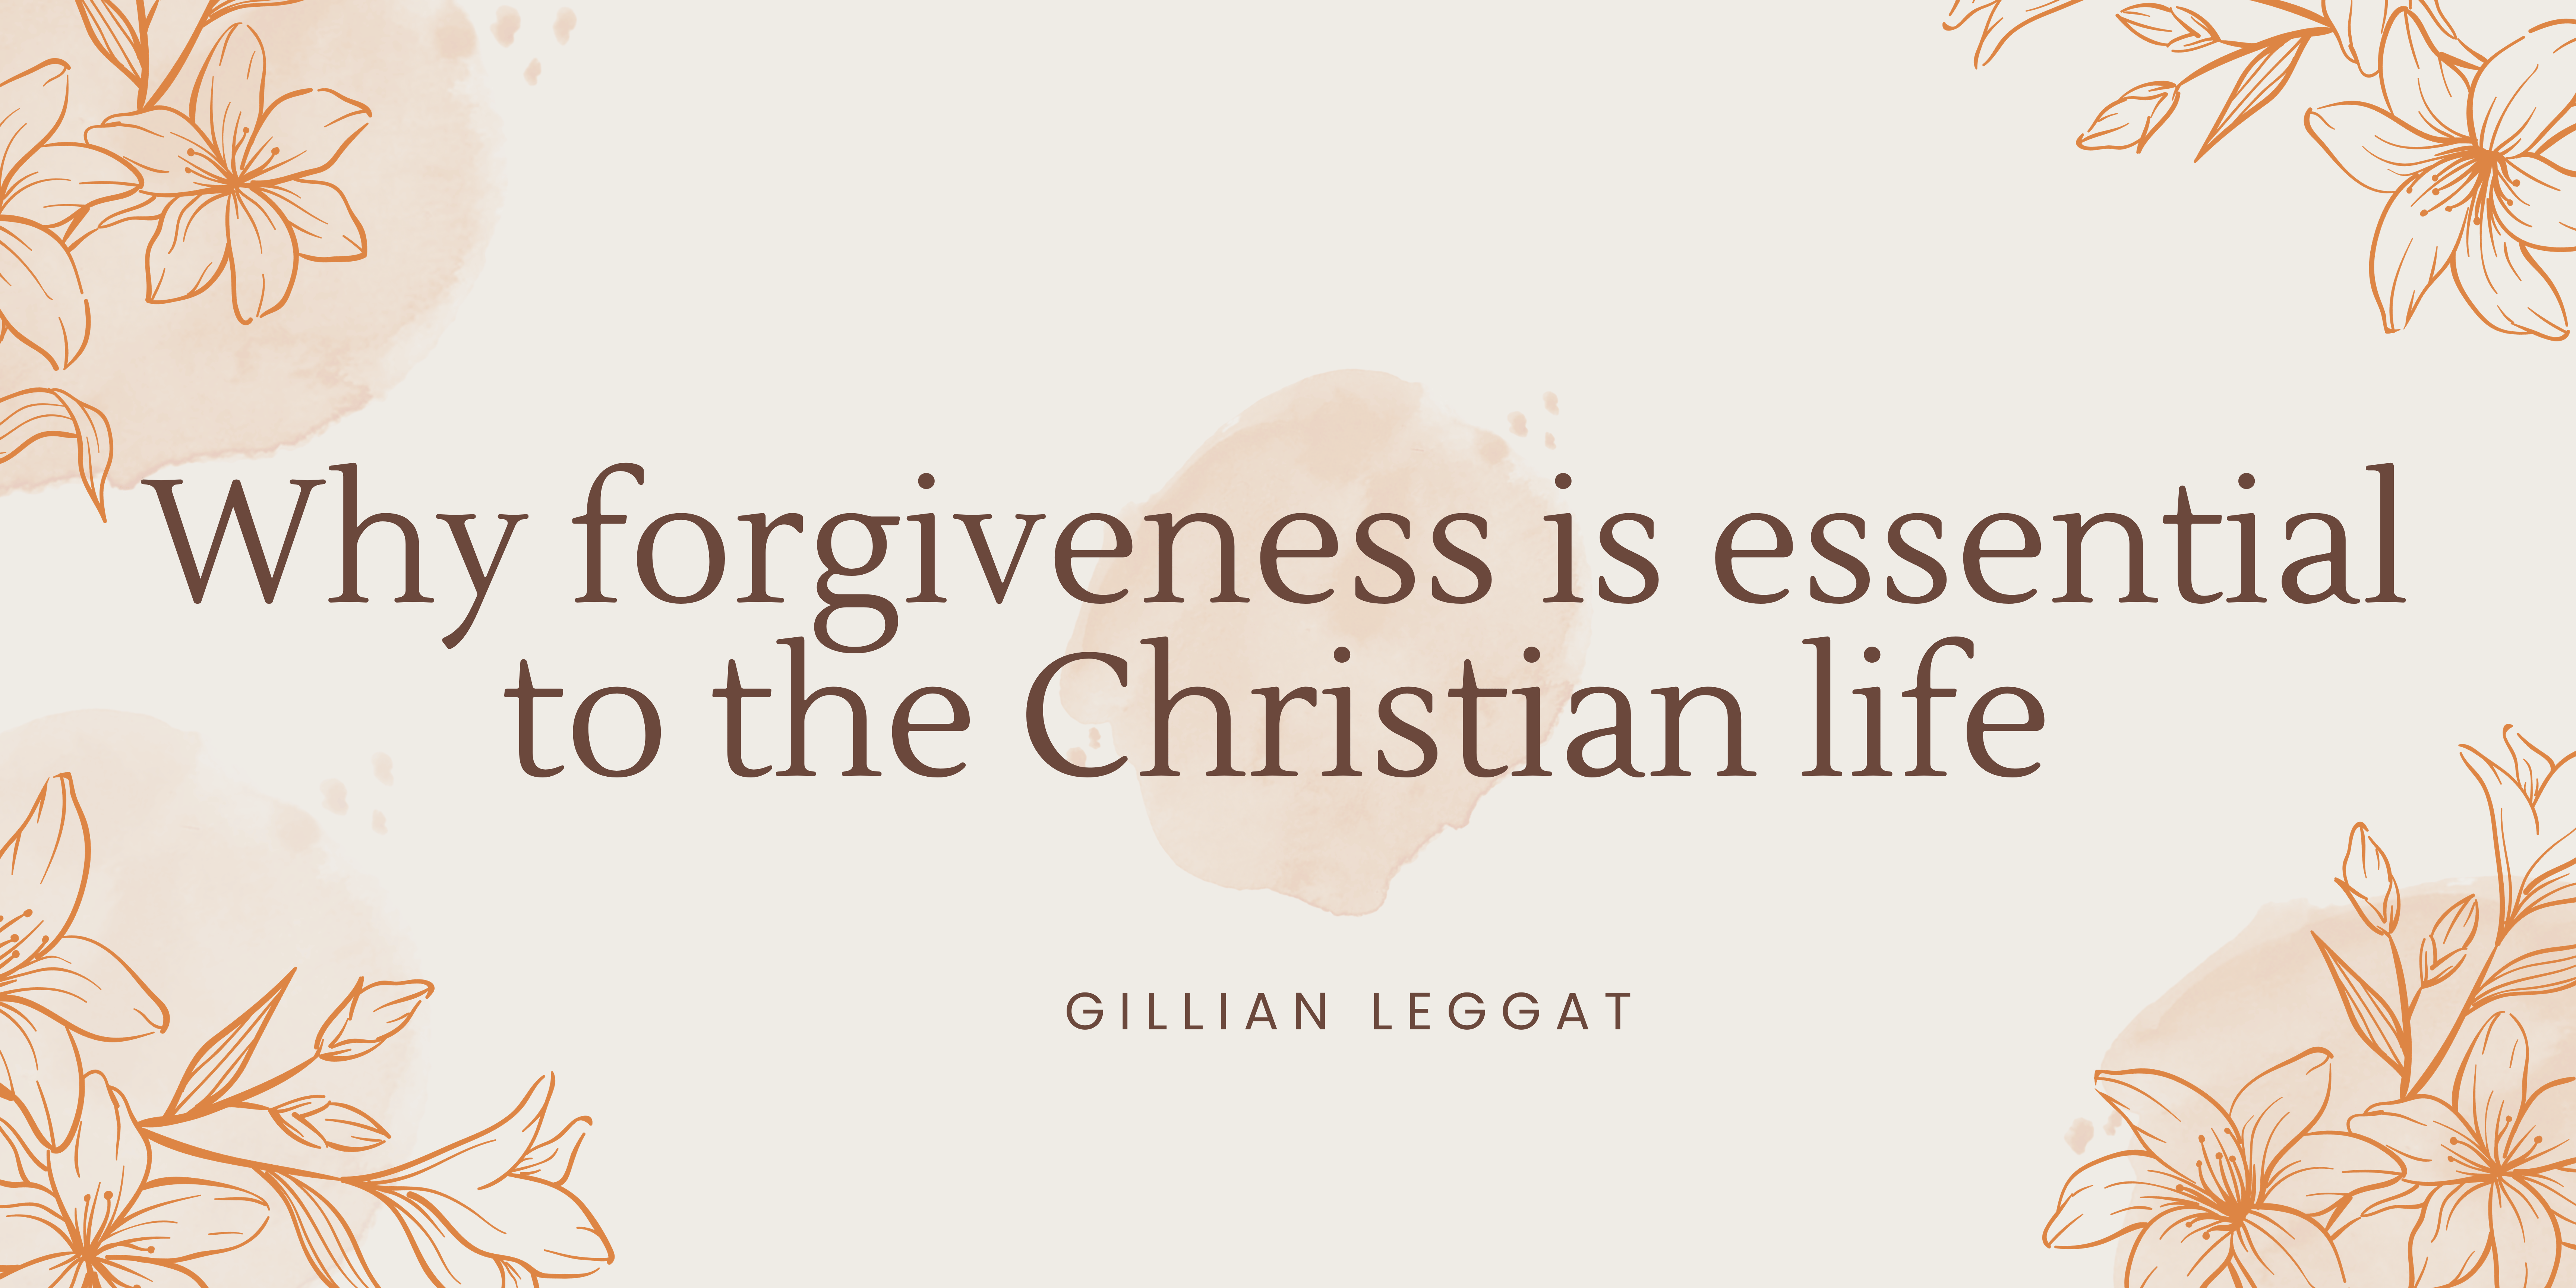 Why forgiveness is essential to the Christian life. A blog by Gillian Leggat.